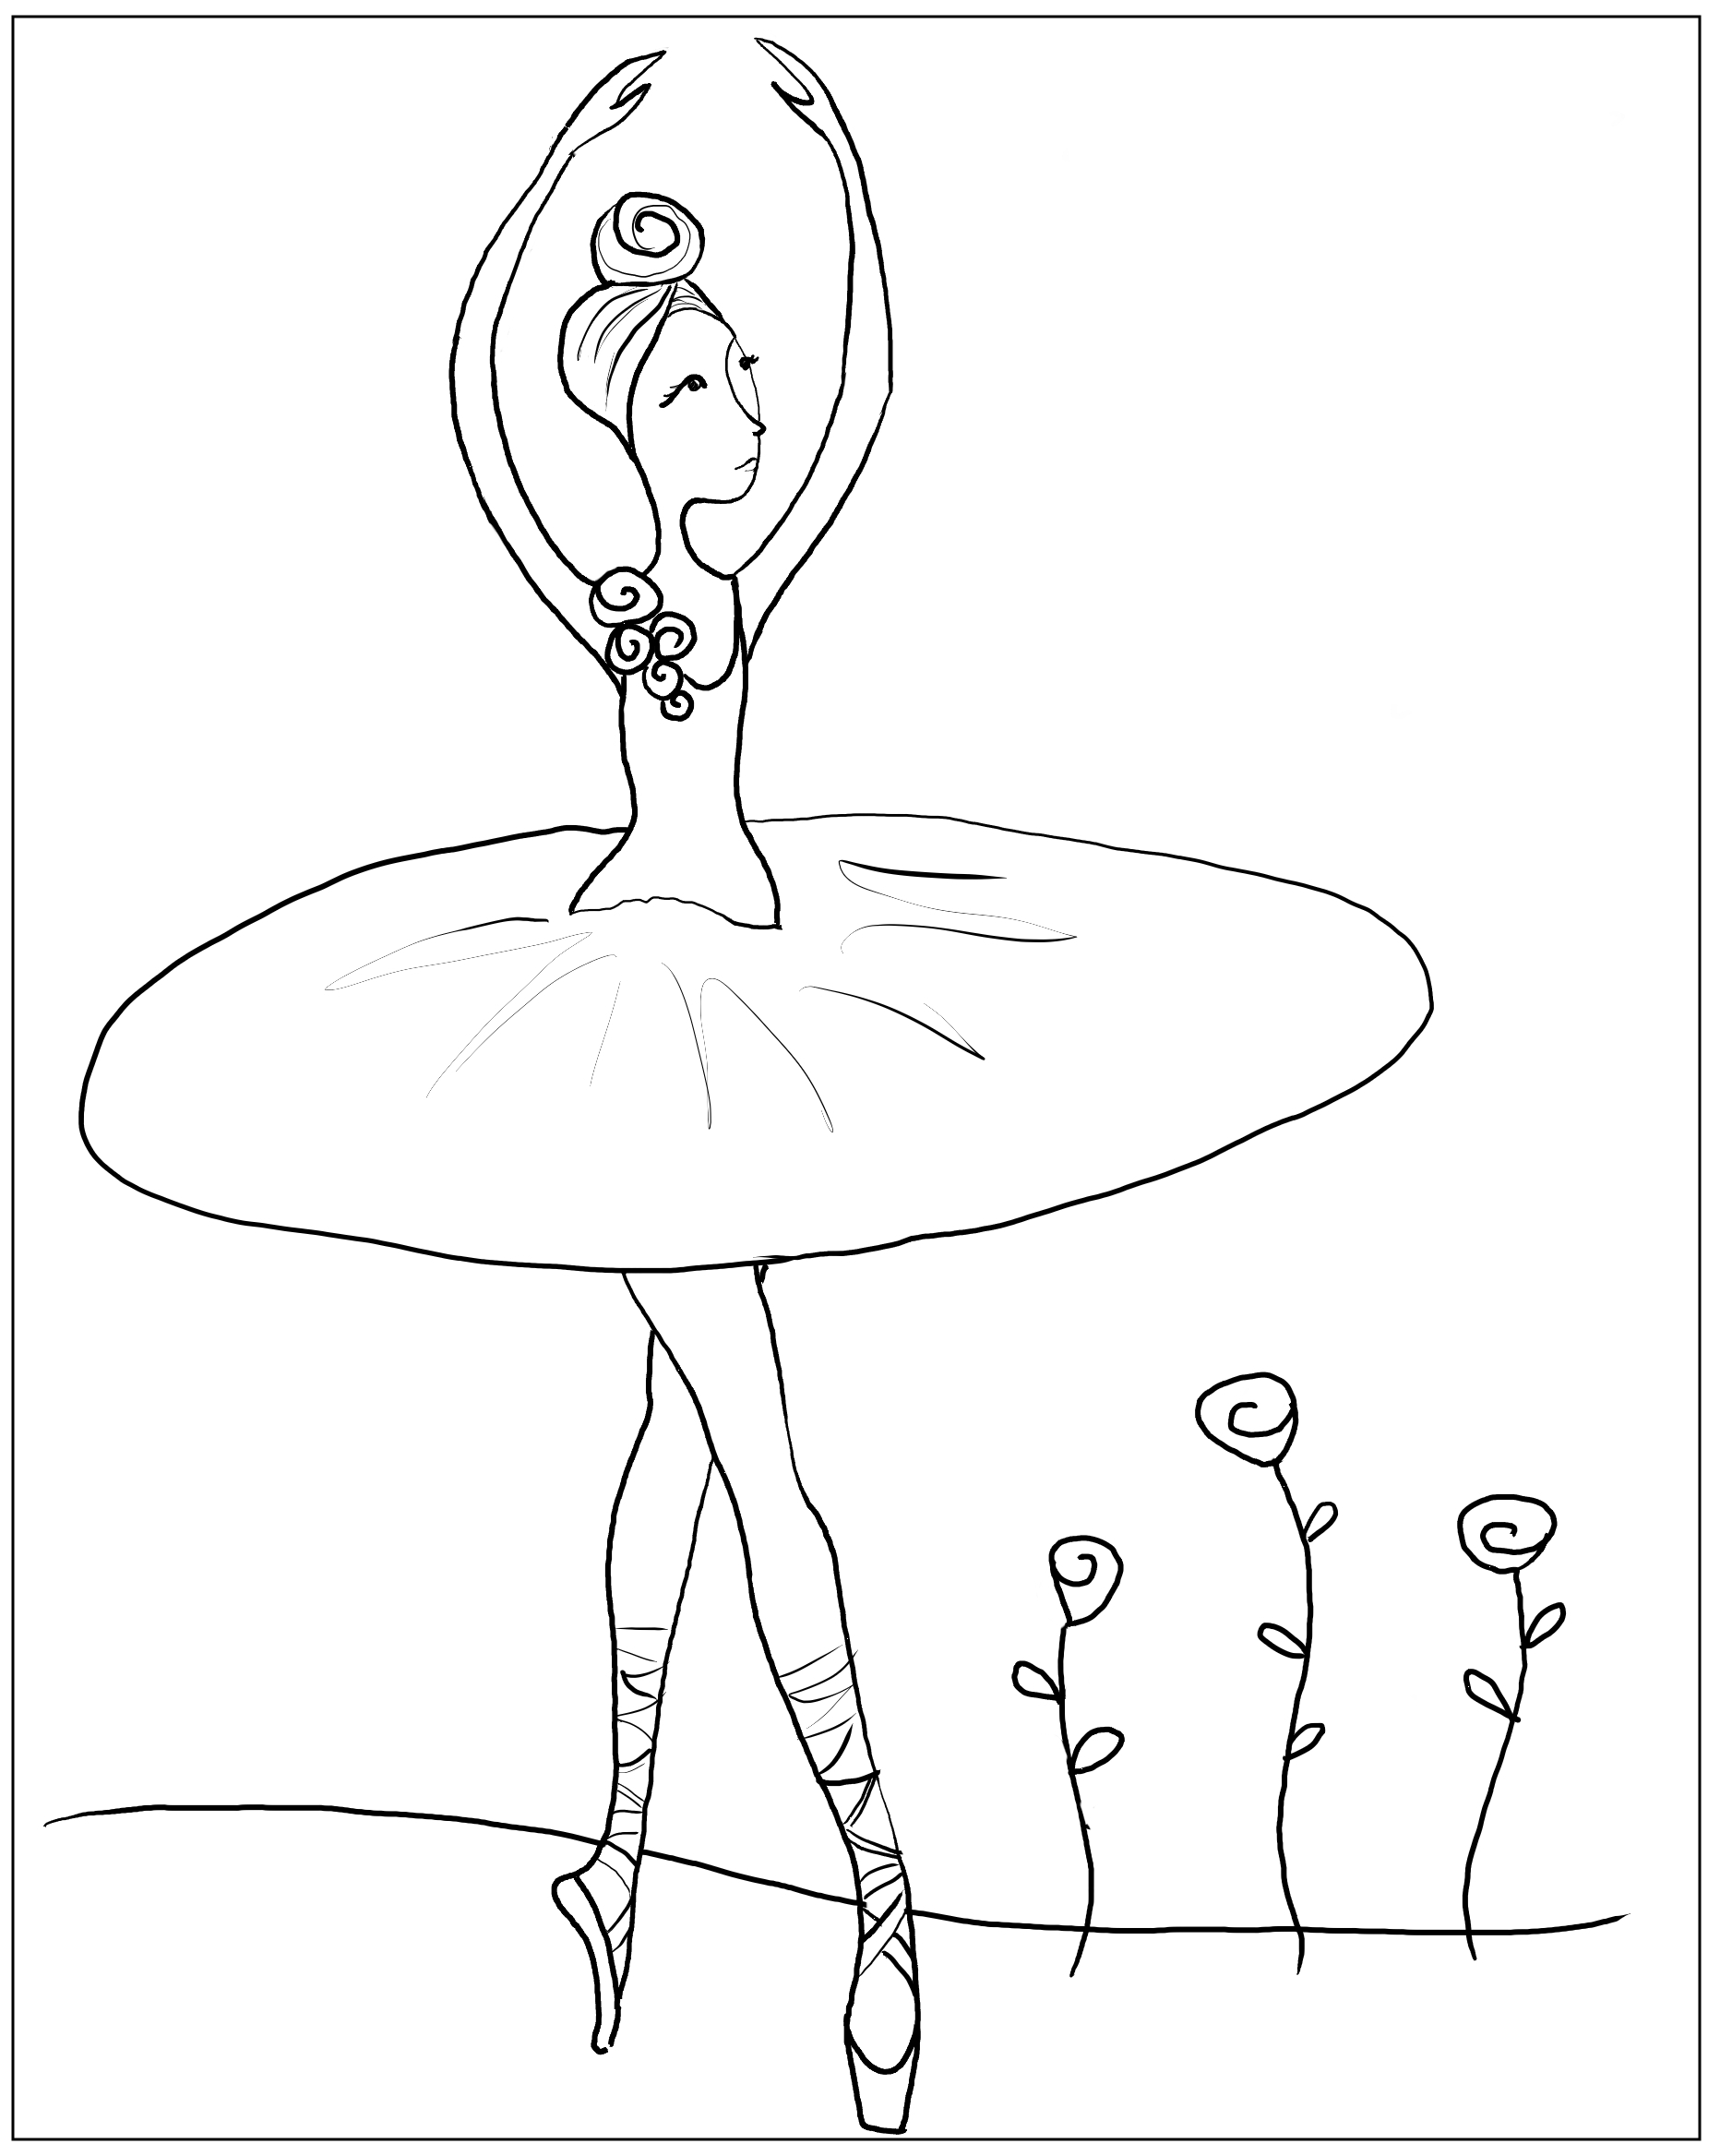 Ballerina Coloring Pages For Kids Coloring Ideas Ballet Coloring Pages Printable Ideas Splendi Photo